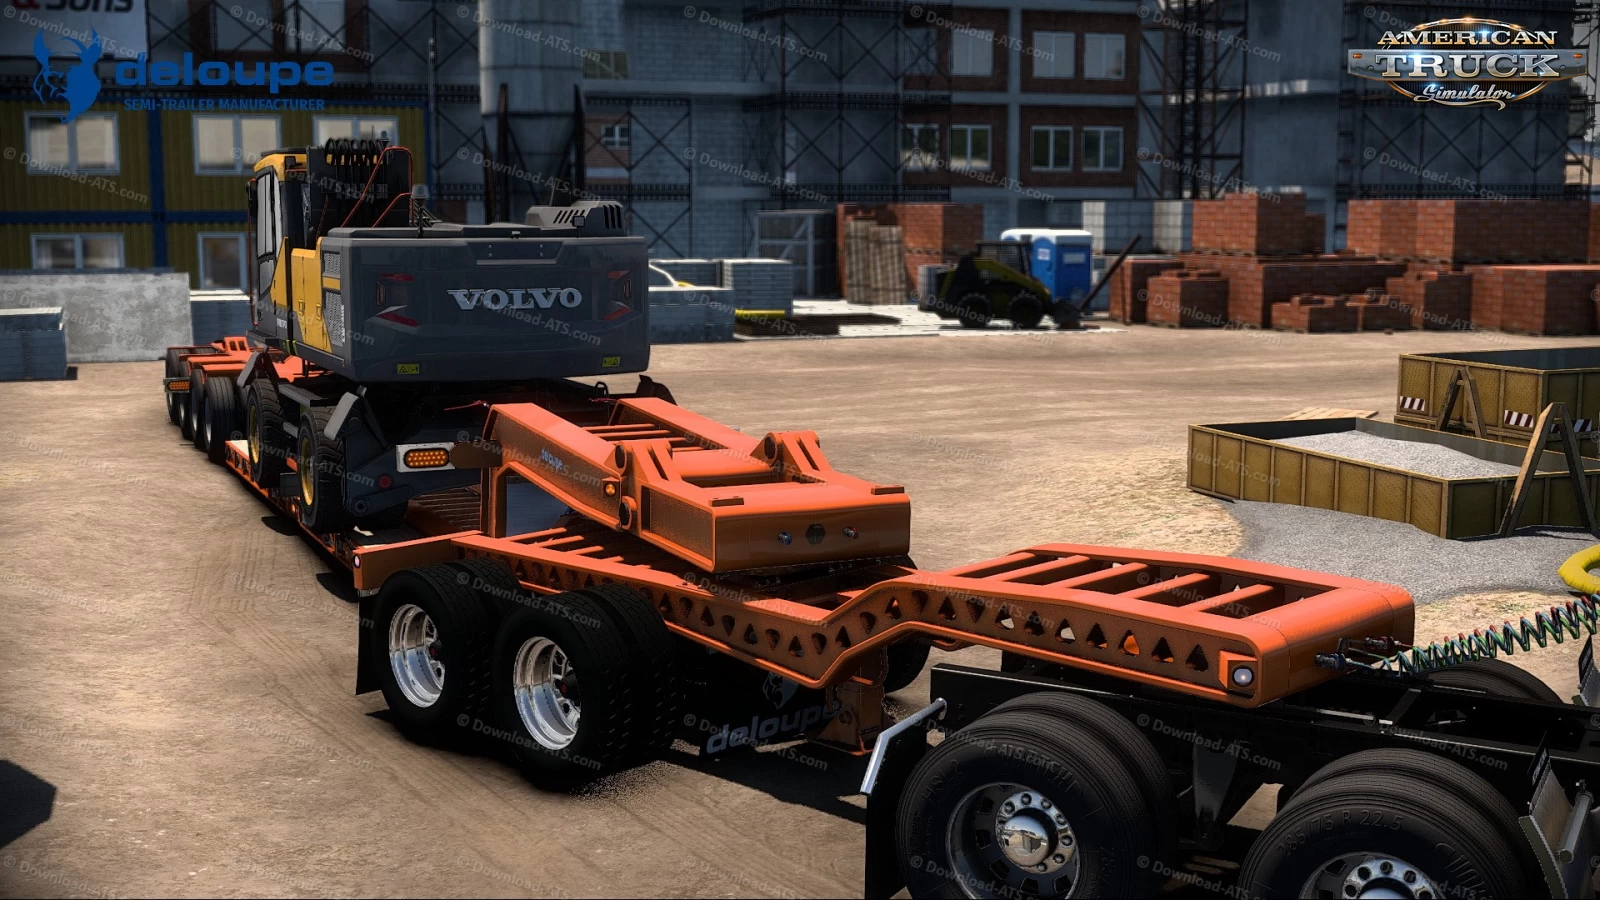 Corby Deloupe Lowboy Trailer v2.0 (1.43.x) for ATS